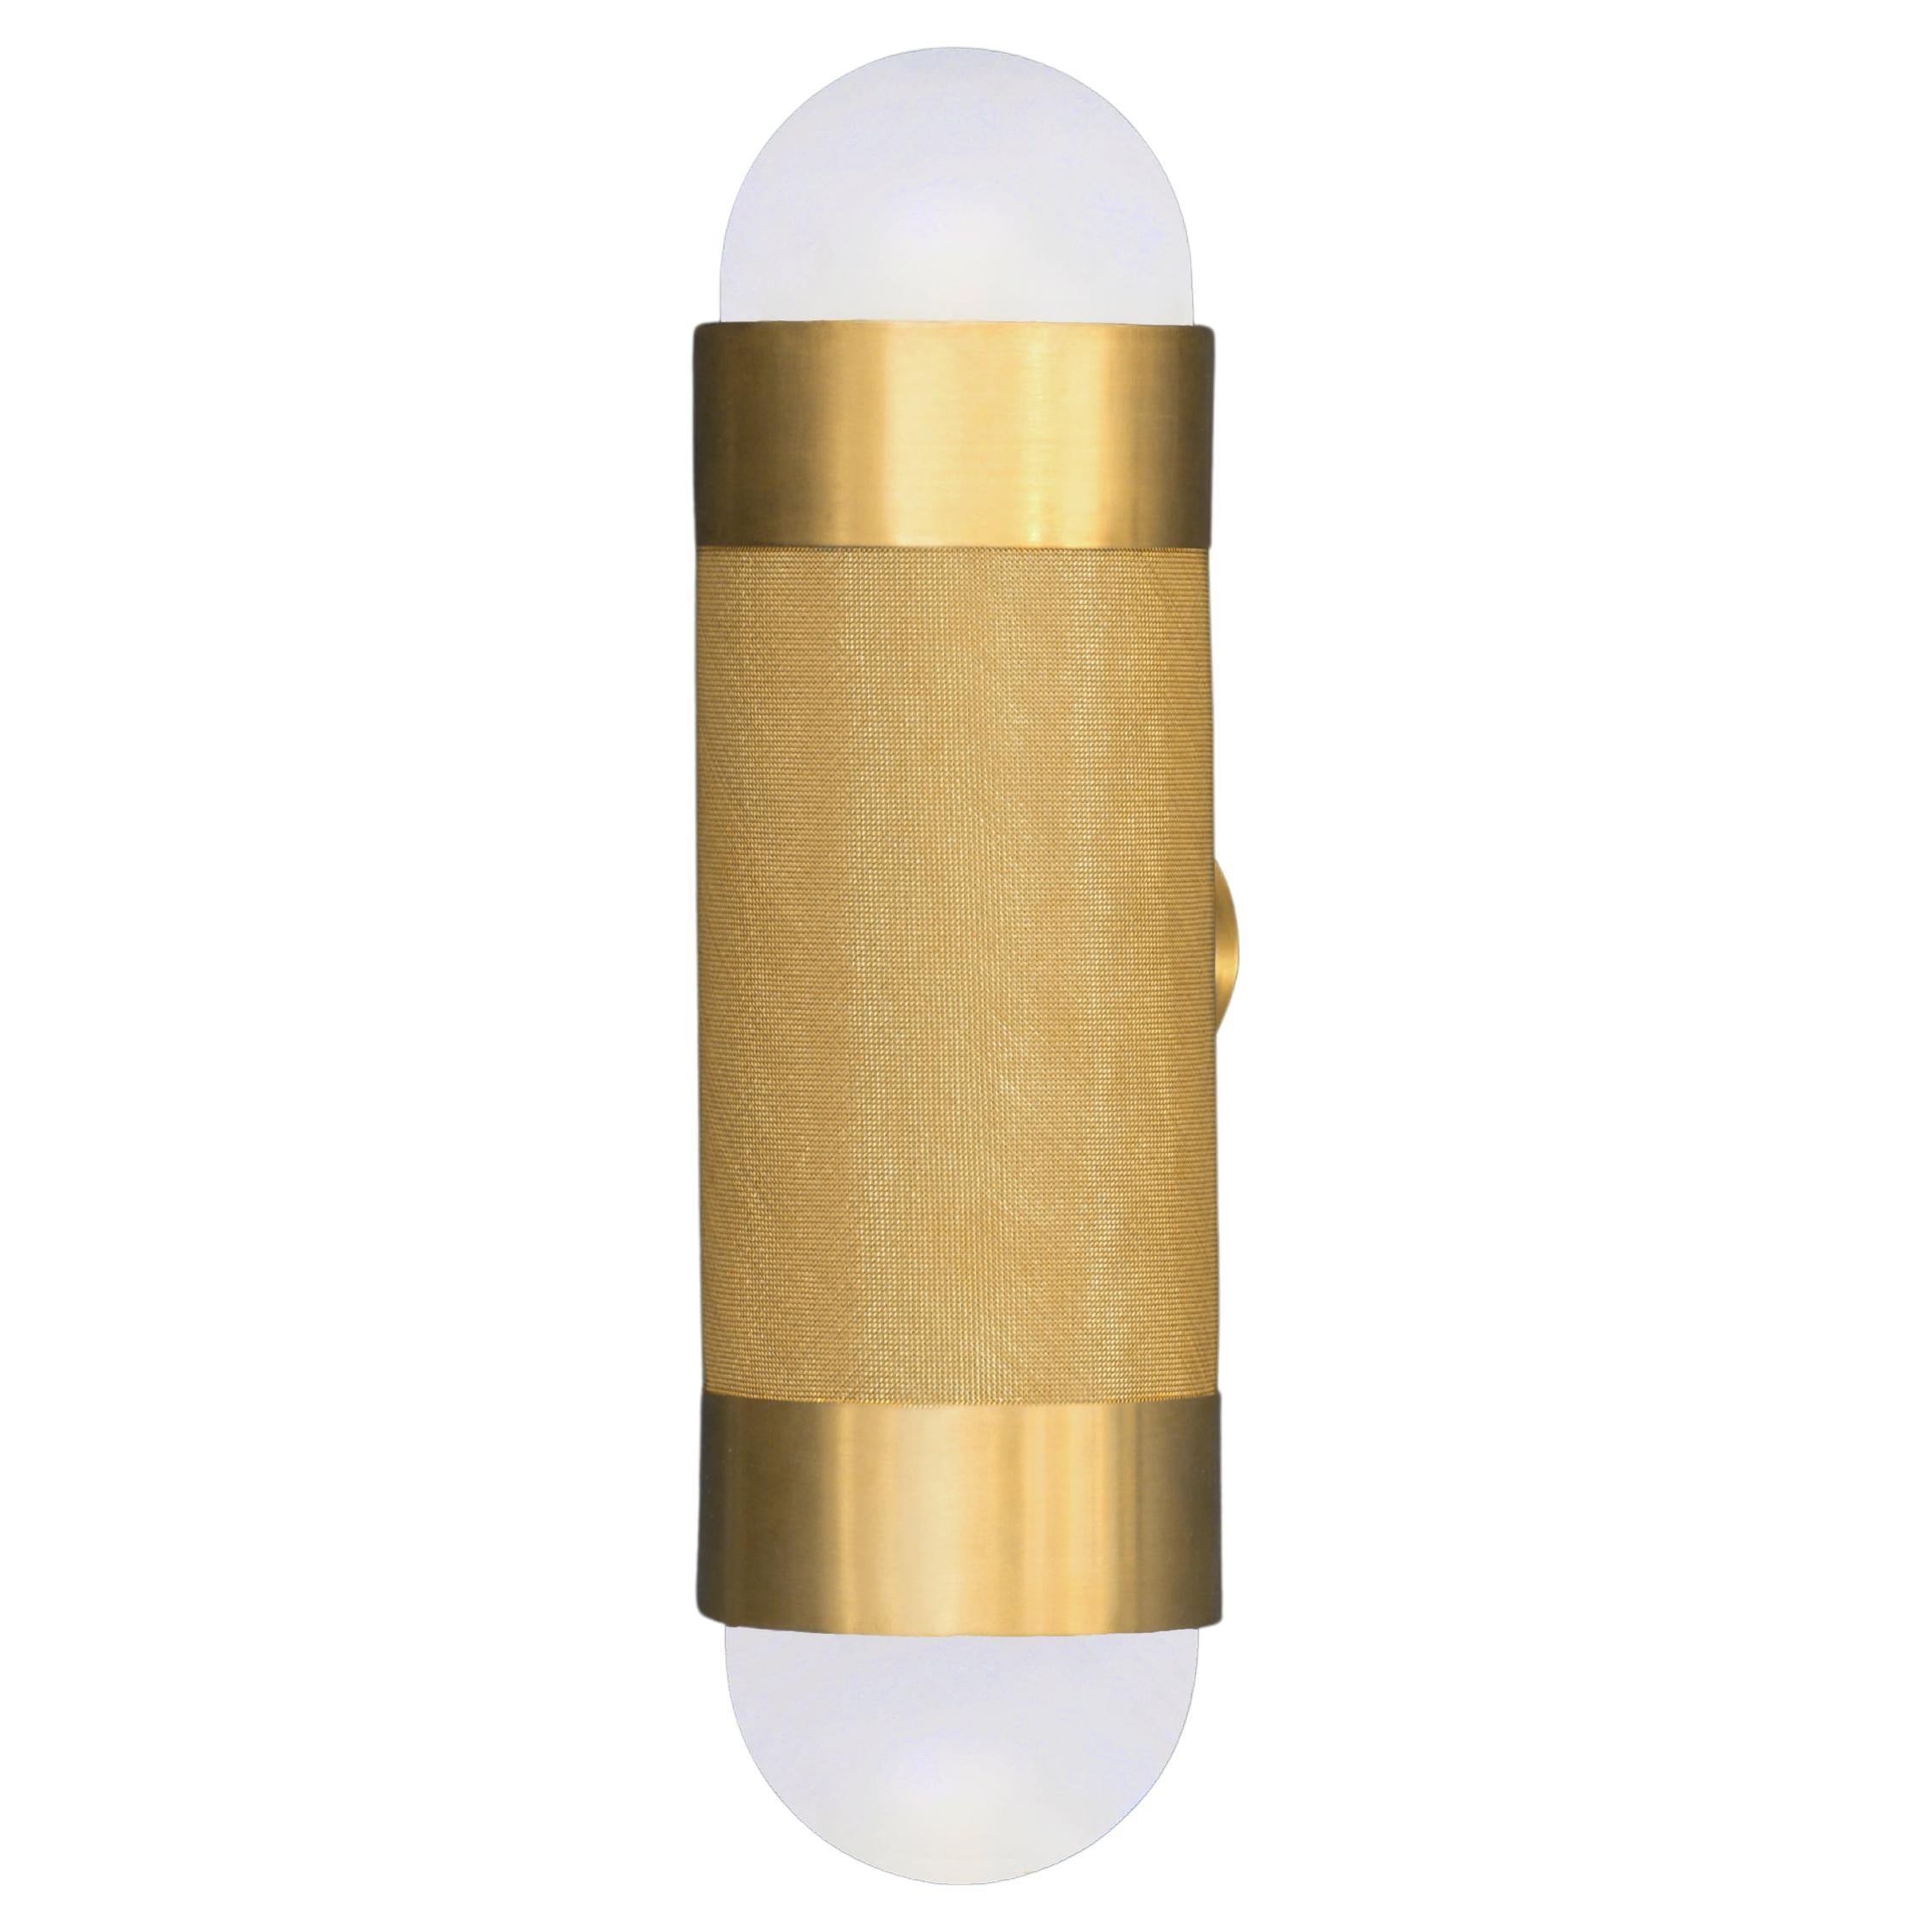 LOOM Brushed & Woven Brass Cylindrical Wall Light, Wall Sconce 